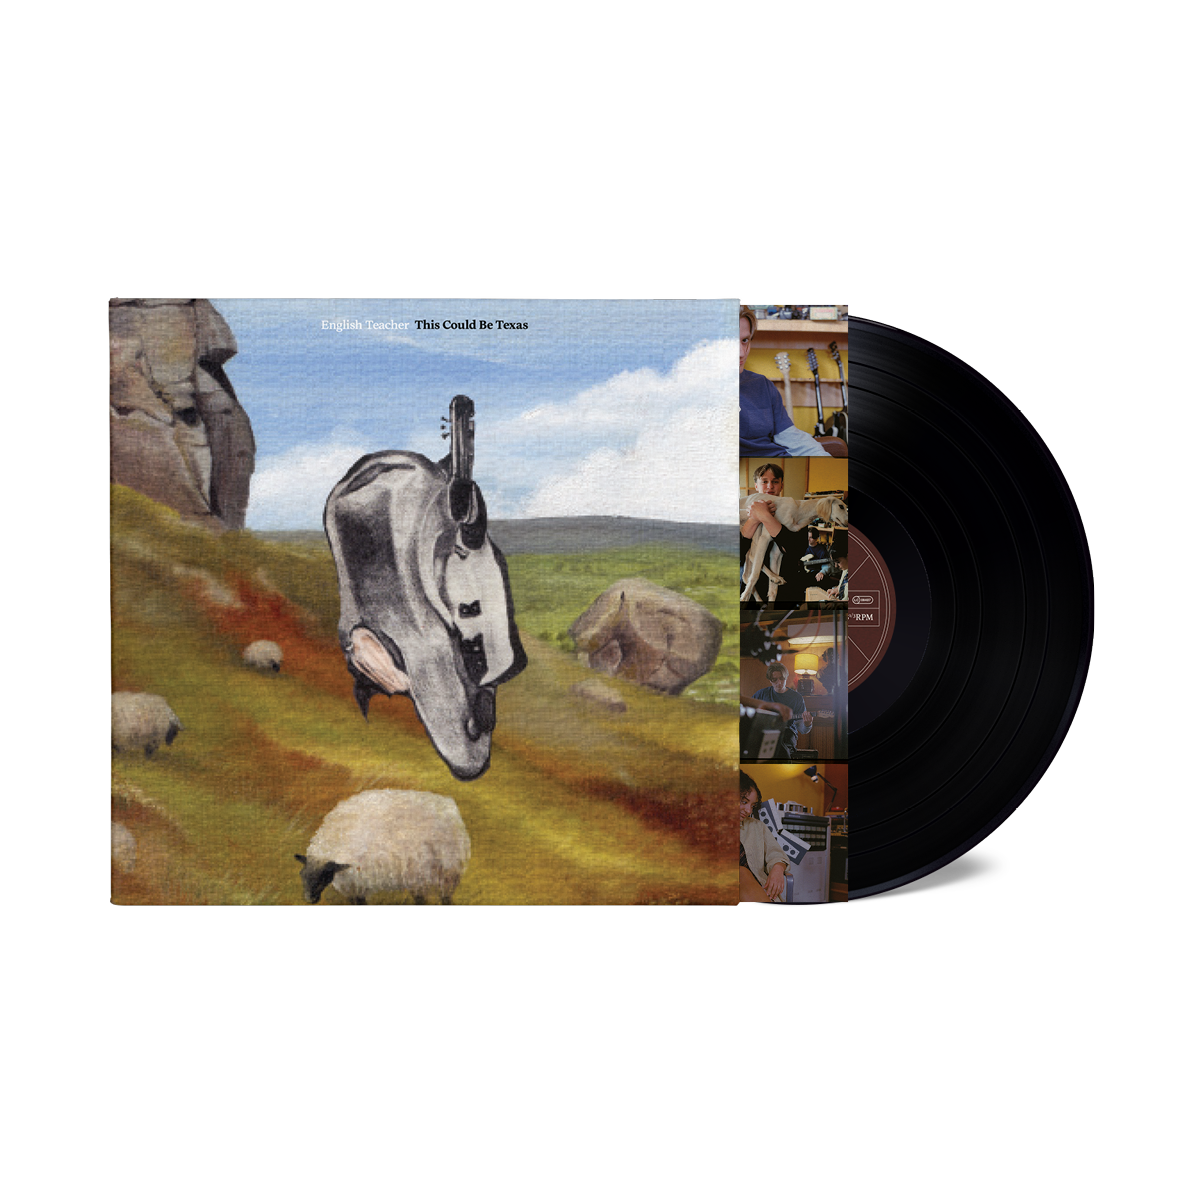 This Could be Texas: Vinyl LP + Signed Art Card